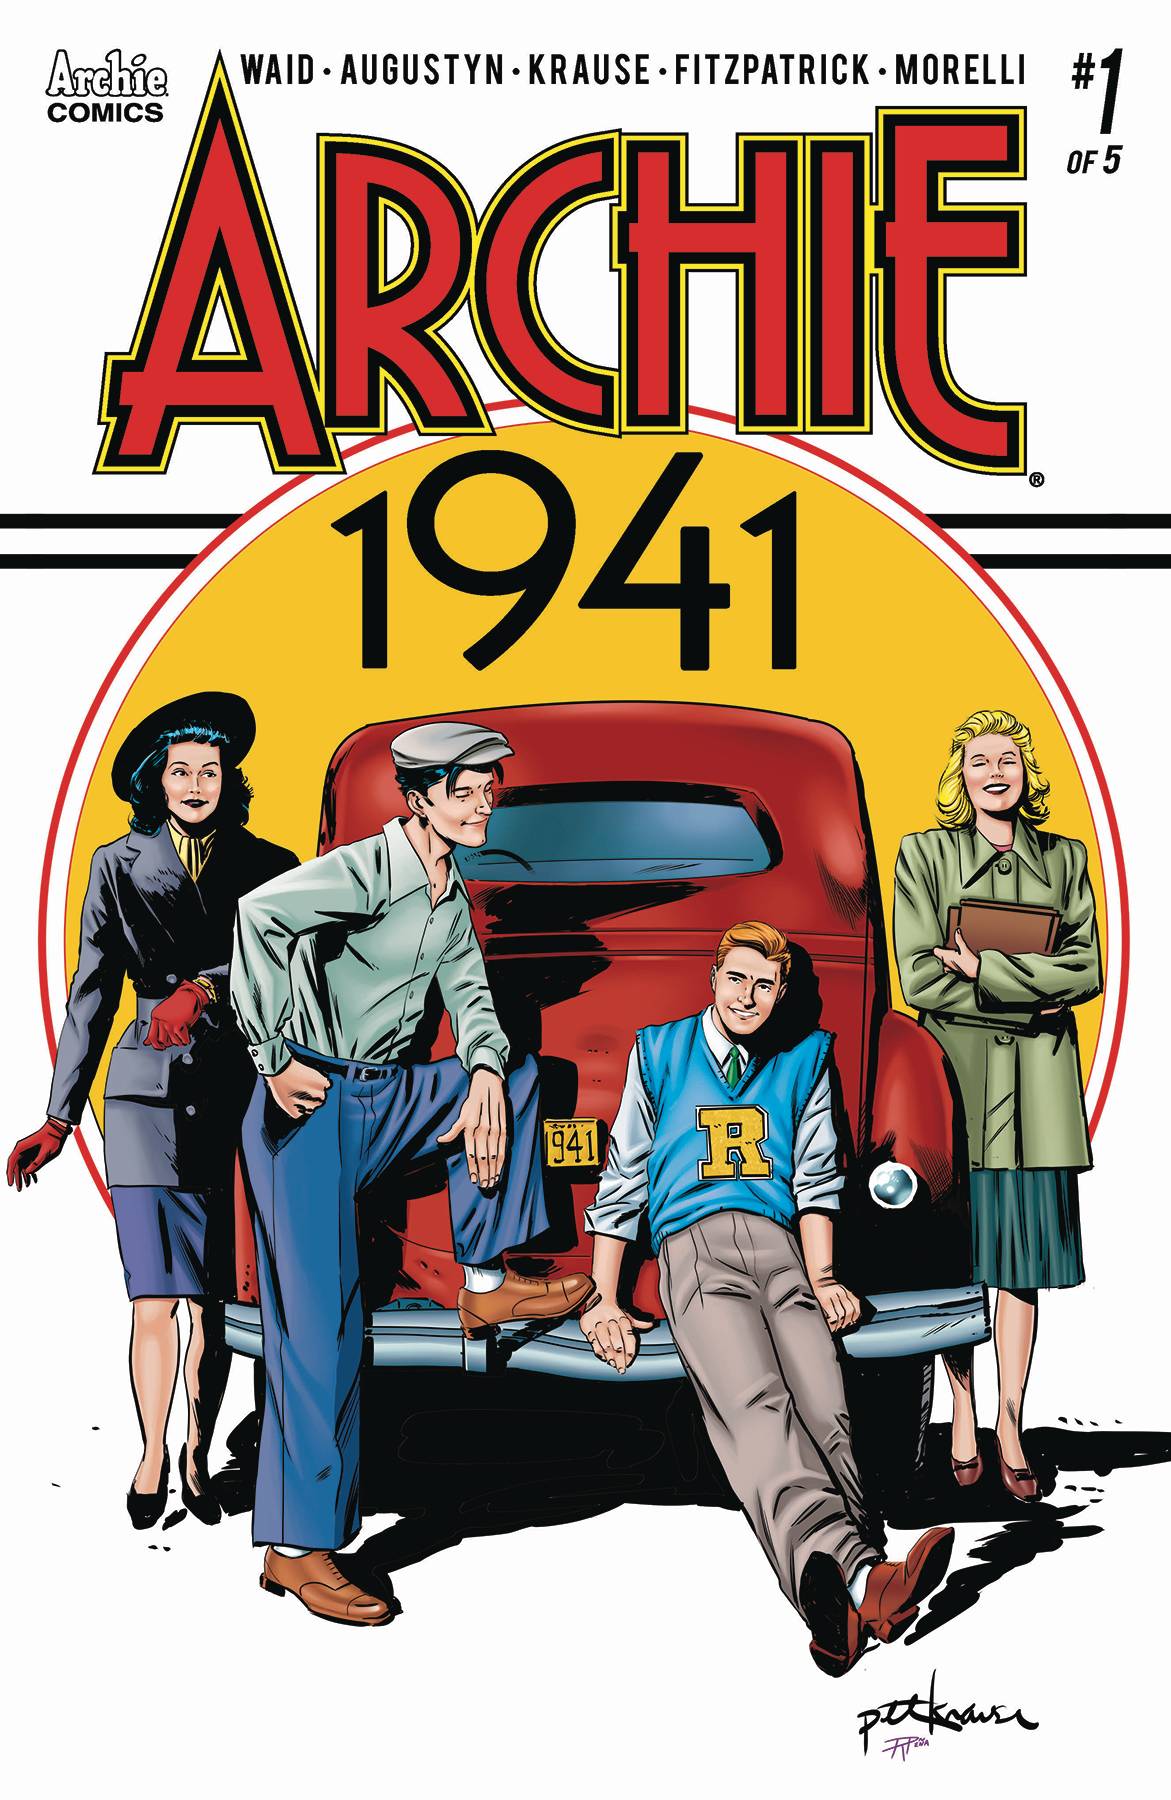 Archie 1941 #1 Cover A Krause (Of 5)